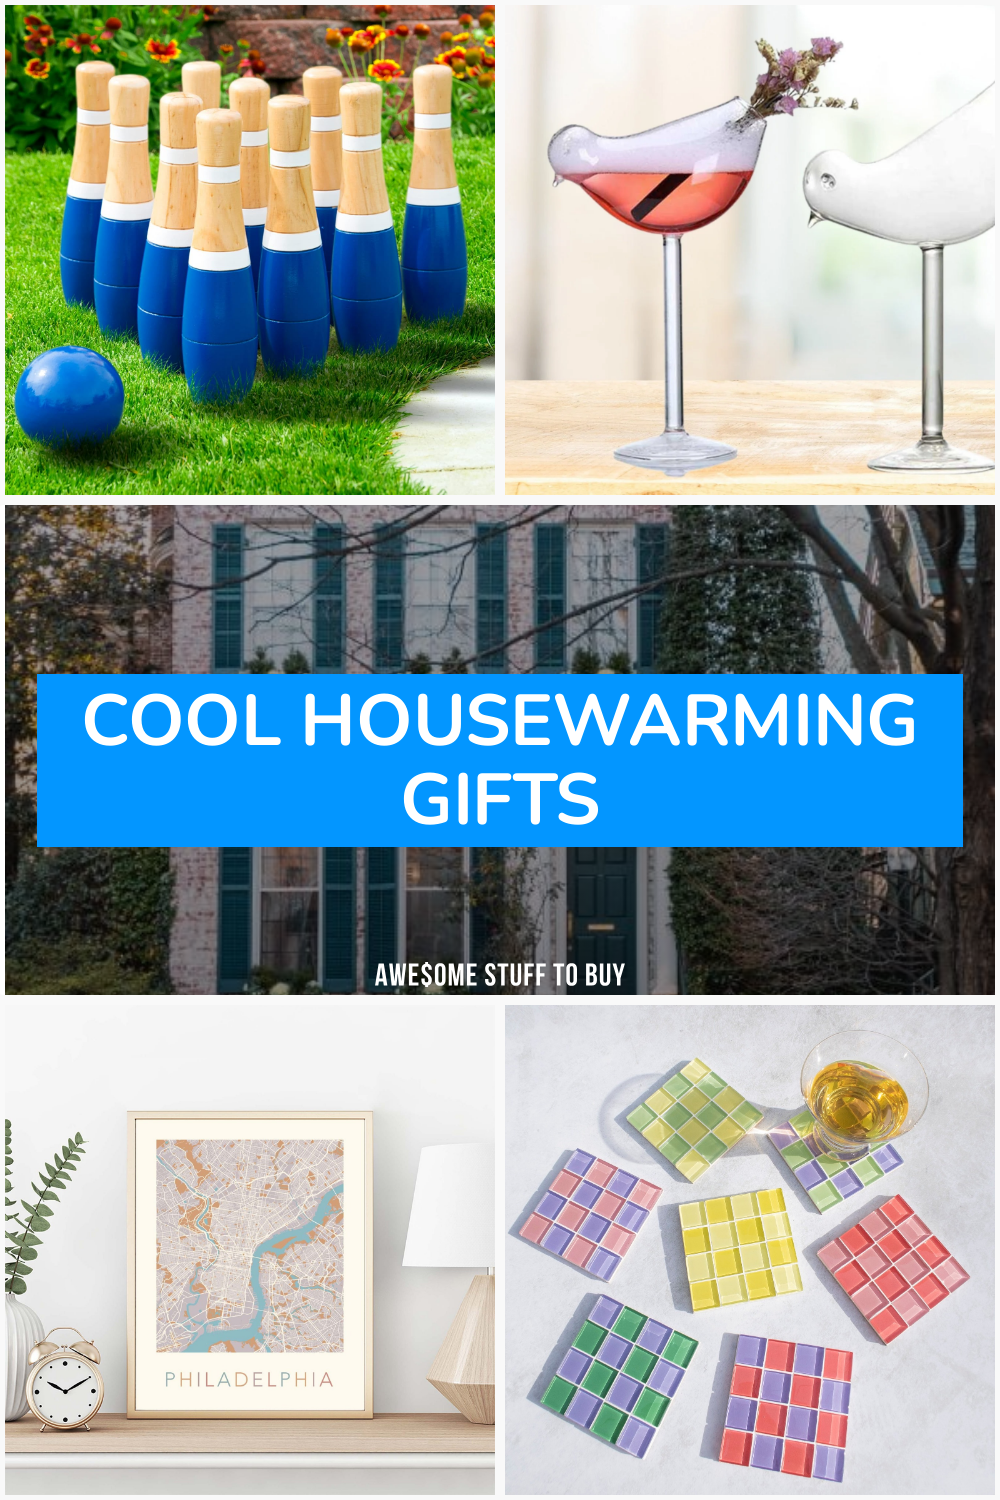 Housewarming Gifts // Awesome Stuff to Buy